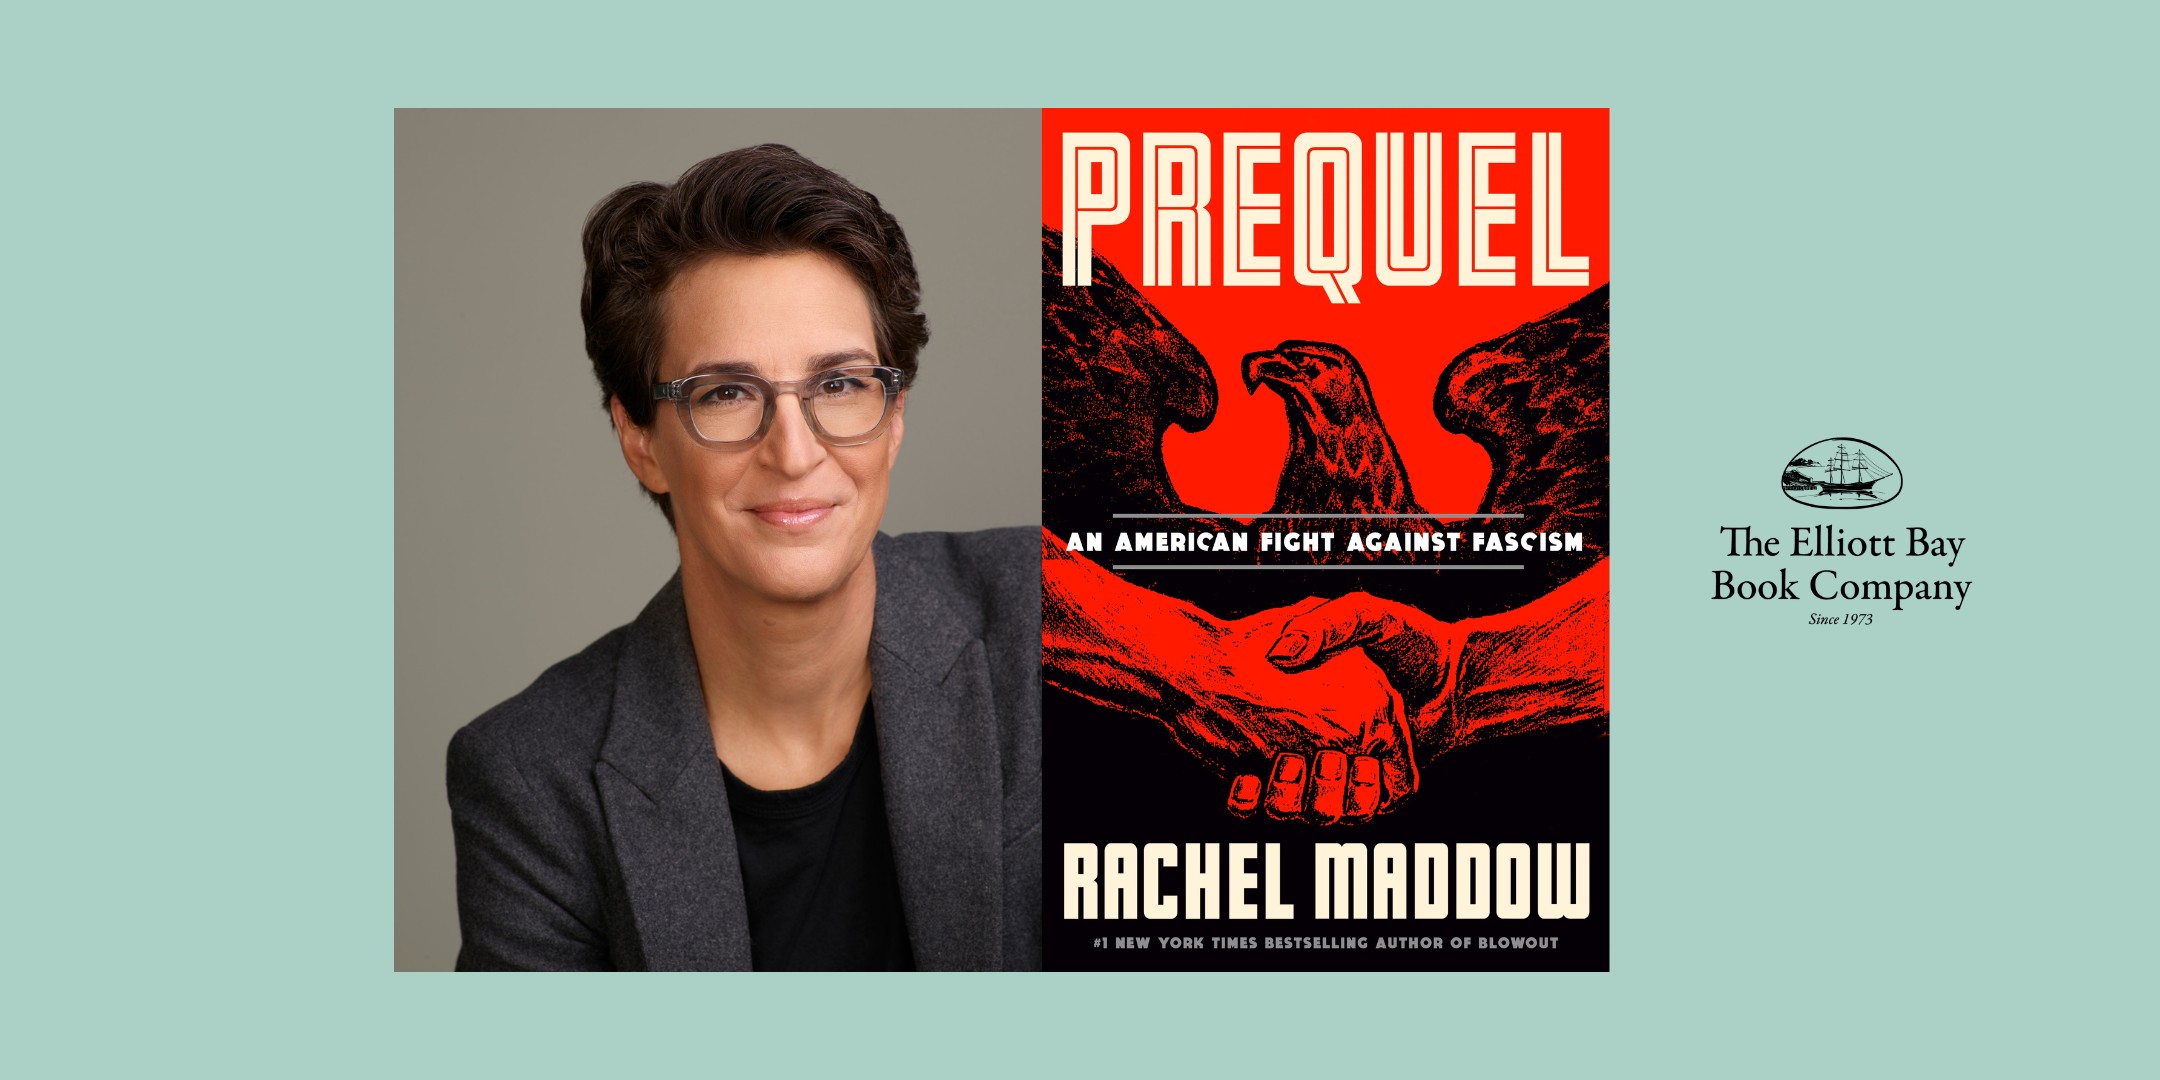 PREQUEL An American Fight Against Fascism By Rachel Maddow, 40 OFF